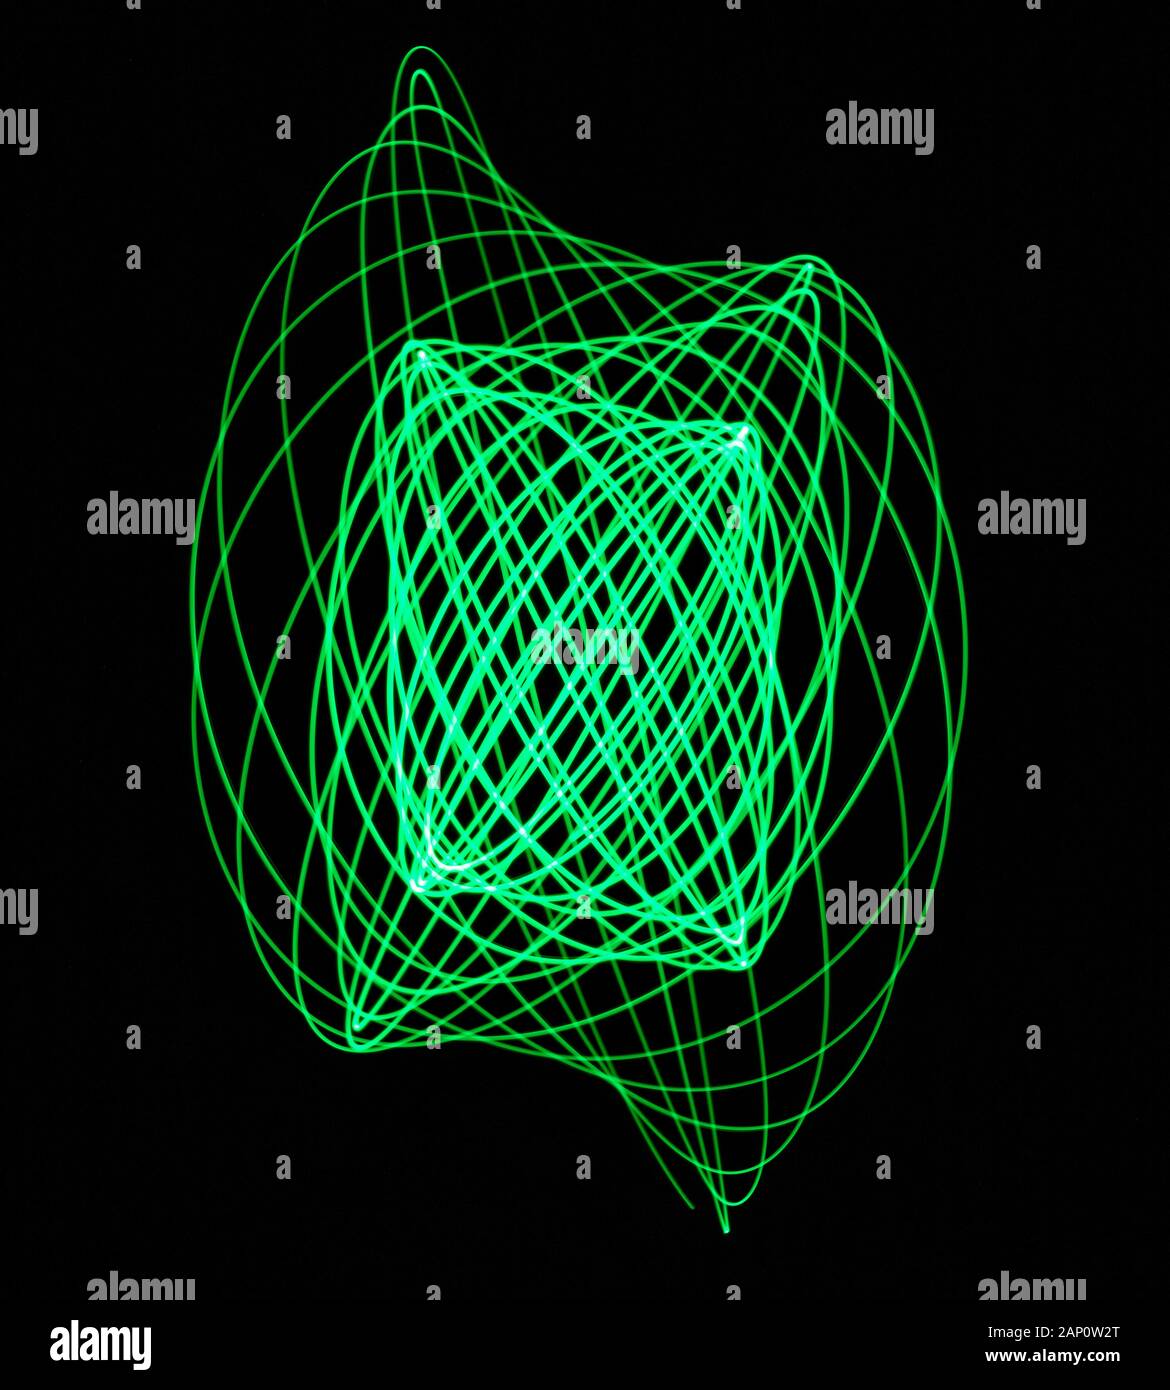 Light traces made with a moving light attached to a compound pendulum system to produce Lissajous figures. Stock Photo